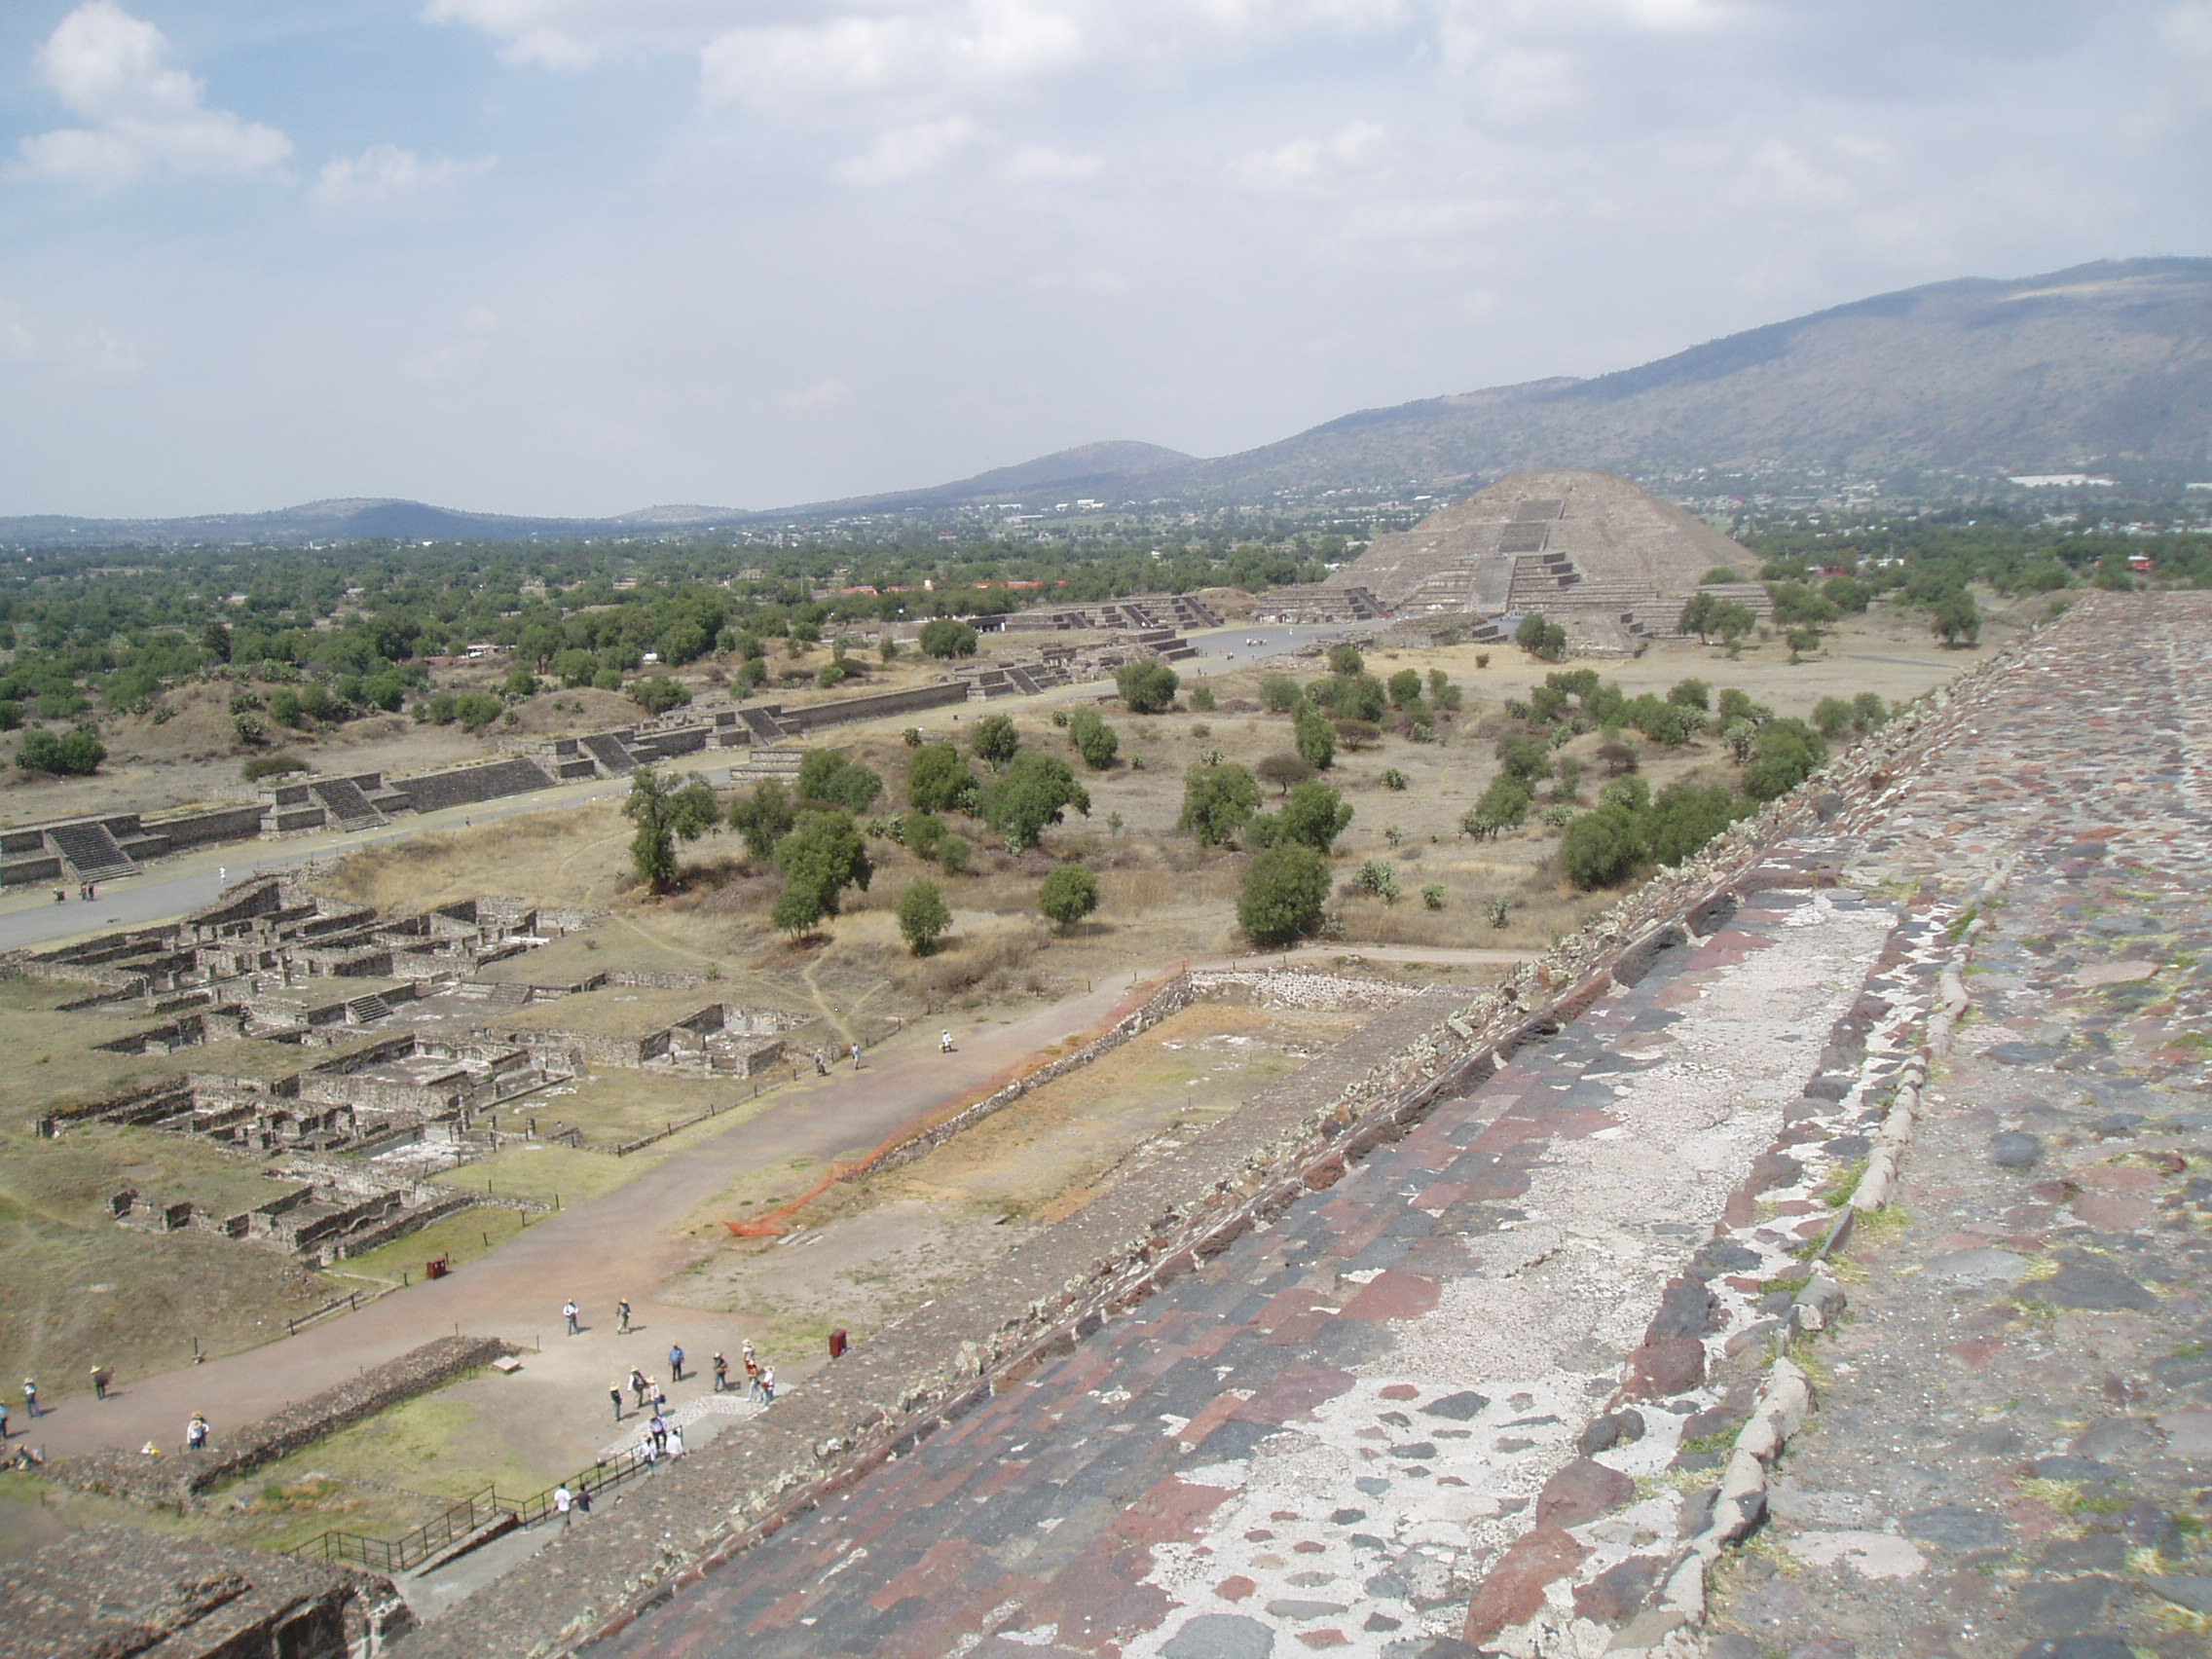 Avenue of the Dead, Teotihuacan Teotihuacan is one of the most famous and important sites of ancient Mexico, best known for it's enormous Avenue of the Dead and the great pyramids of the Sun and Moon. Although the site was known in Aztec times as the 'Birthplace of the Gods' it is actually significantly older, with most of the major structures built between 100-250AD and the city, one of the largest ever ancient settlements in the Americas, was believed to have been still inhabited up to the 8th century. Today the vast scale of the complex, particularly the so called Avenue of the Dead, nearly 3km long and flanked by ancient ruins and terraces, continues to awe visitors. At the north end of the Avenue sits the Pyramid of the Moon, whilst it's much larger counterpart, the Pyramid of the Sun, sits halfway up it's eastern side. At the southern end sits the Ciudadela complex which centres on the smaller pyramid of Quetzelcoatl, earlier and more ruined than the larger pyramids but retaining it's stunning original sculptural decoration on part of it's western face, featuring the iconic feathered serpent heads. Aside from the great ceremonial structures there are also residential buildings, particularly the palatial complex at the north west corner that retains some vivid fragments of it's original mural decoration. en.wikipedia.org/wiki/Teotihuacan